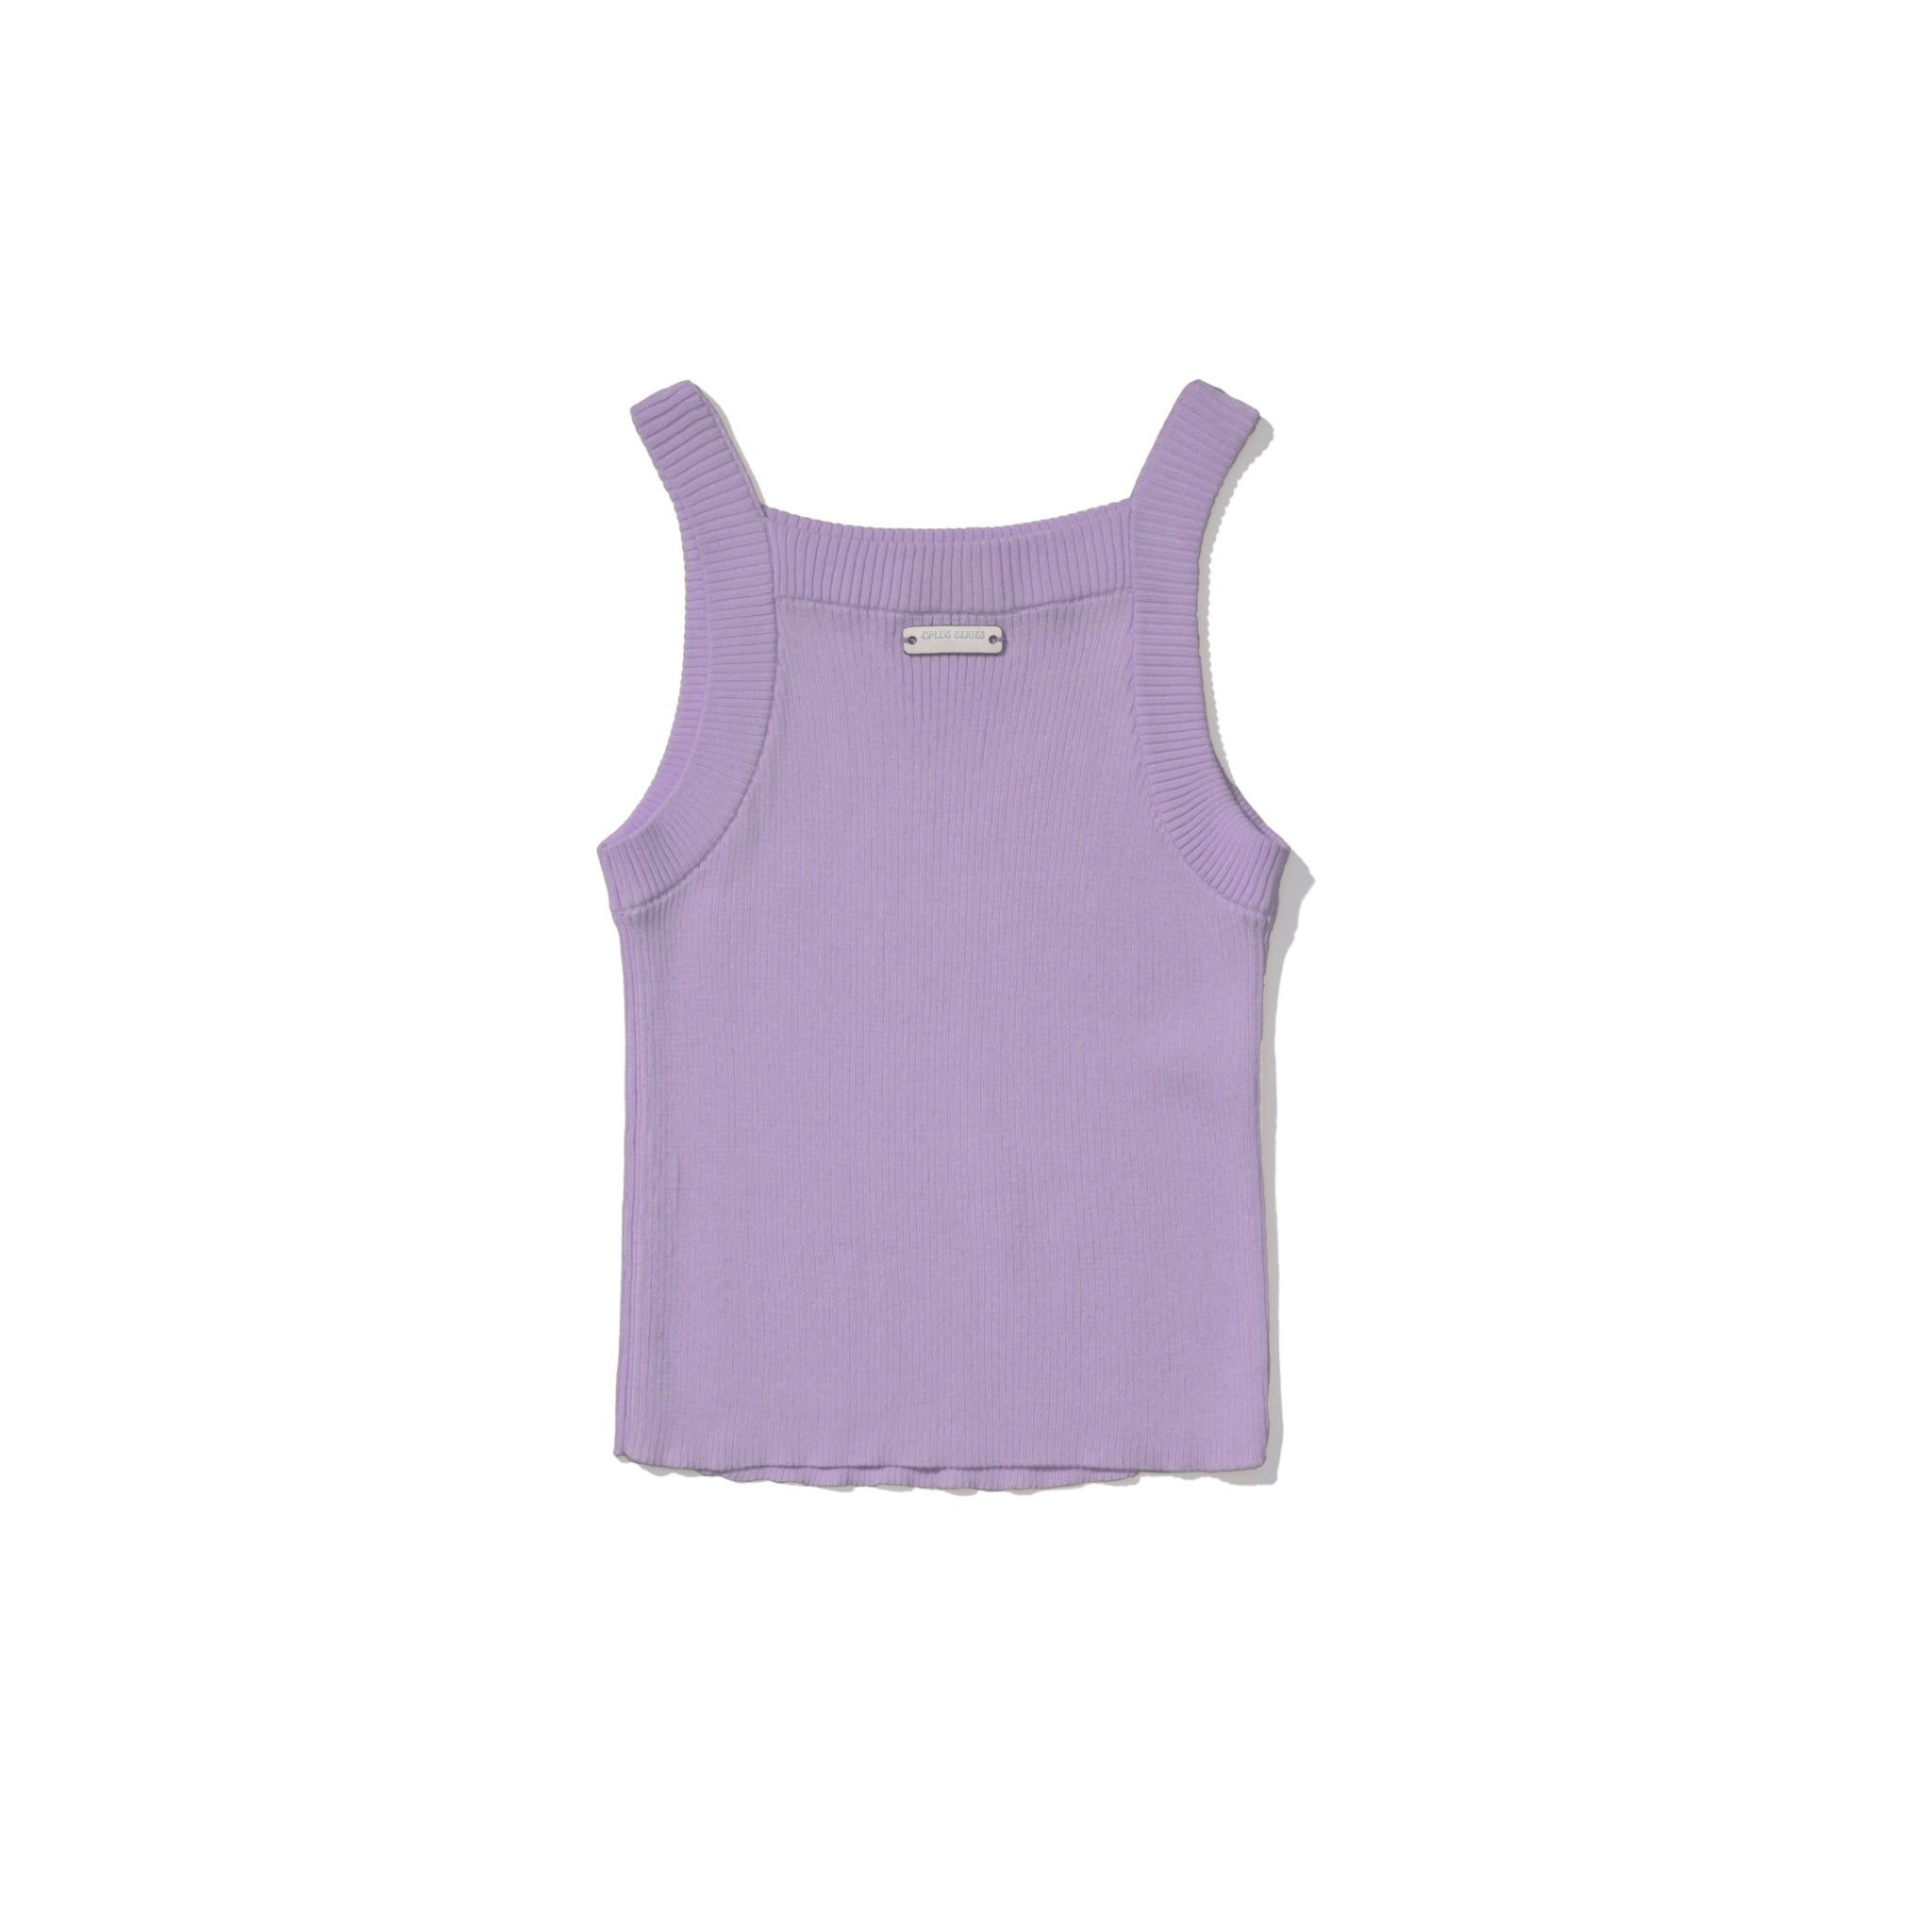 CPLUS SERIES Rib Knit Vest with Square Neck in Light Purple | MADA IN CHINA